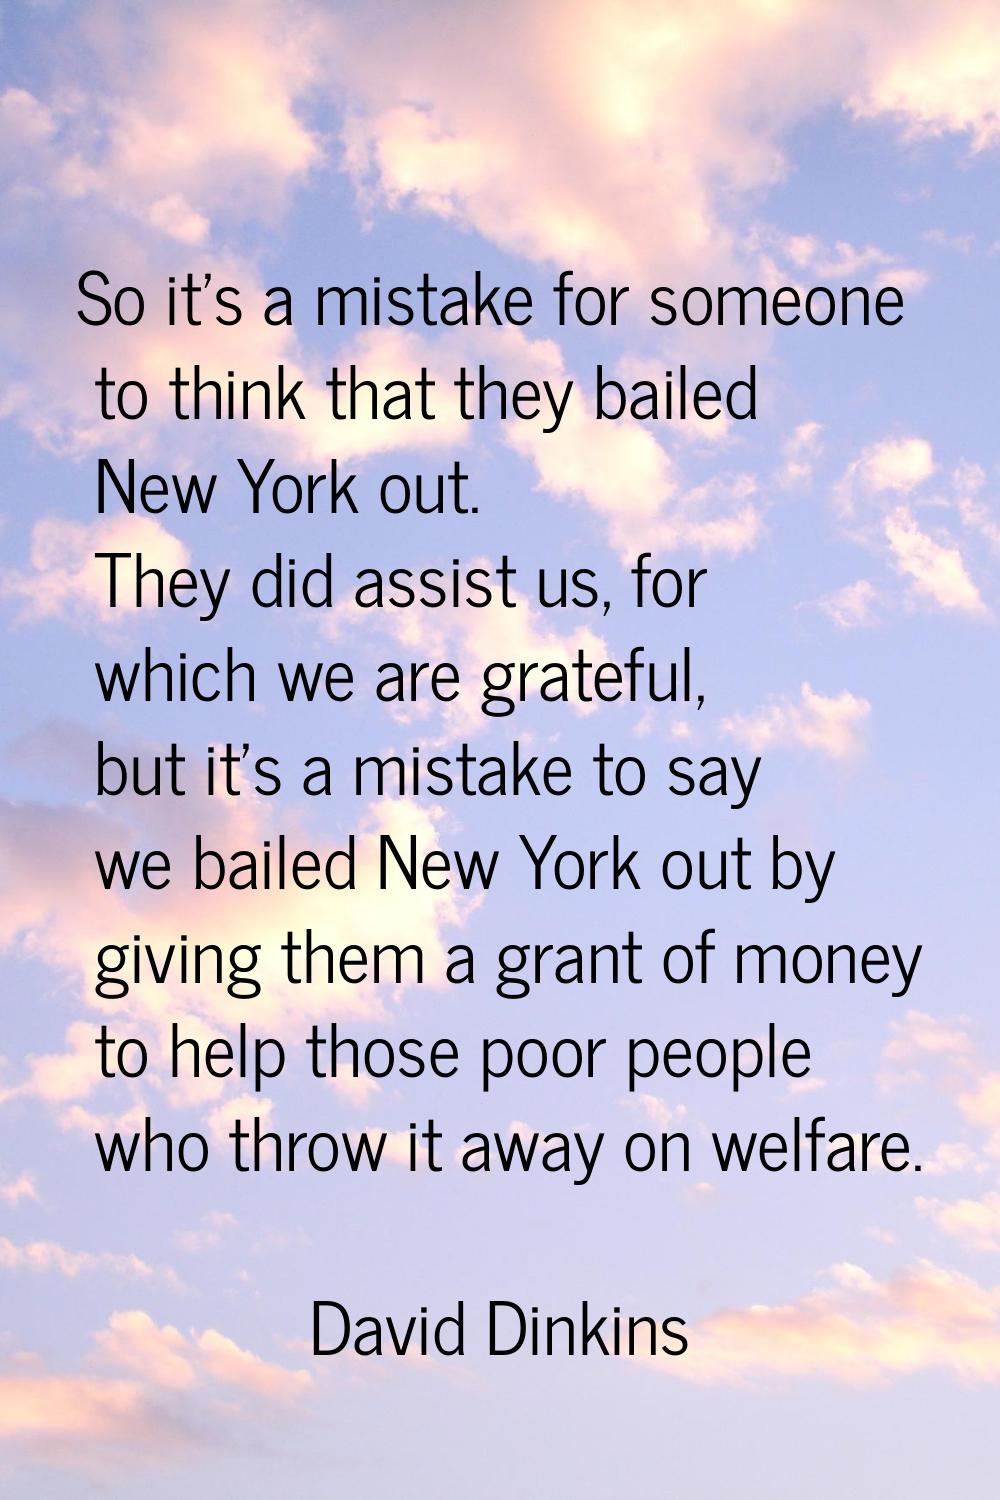 So it's a mistake for someone to think that they bailed New York out. They did assist us, for which